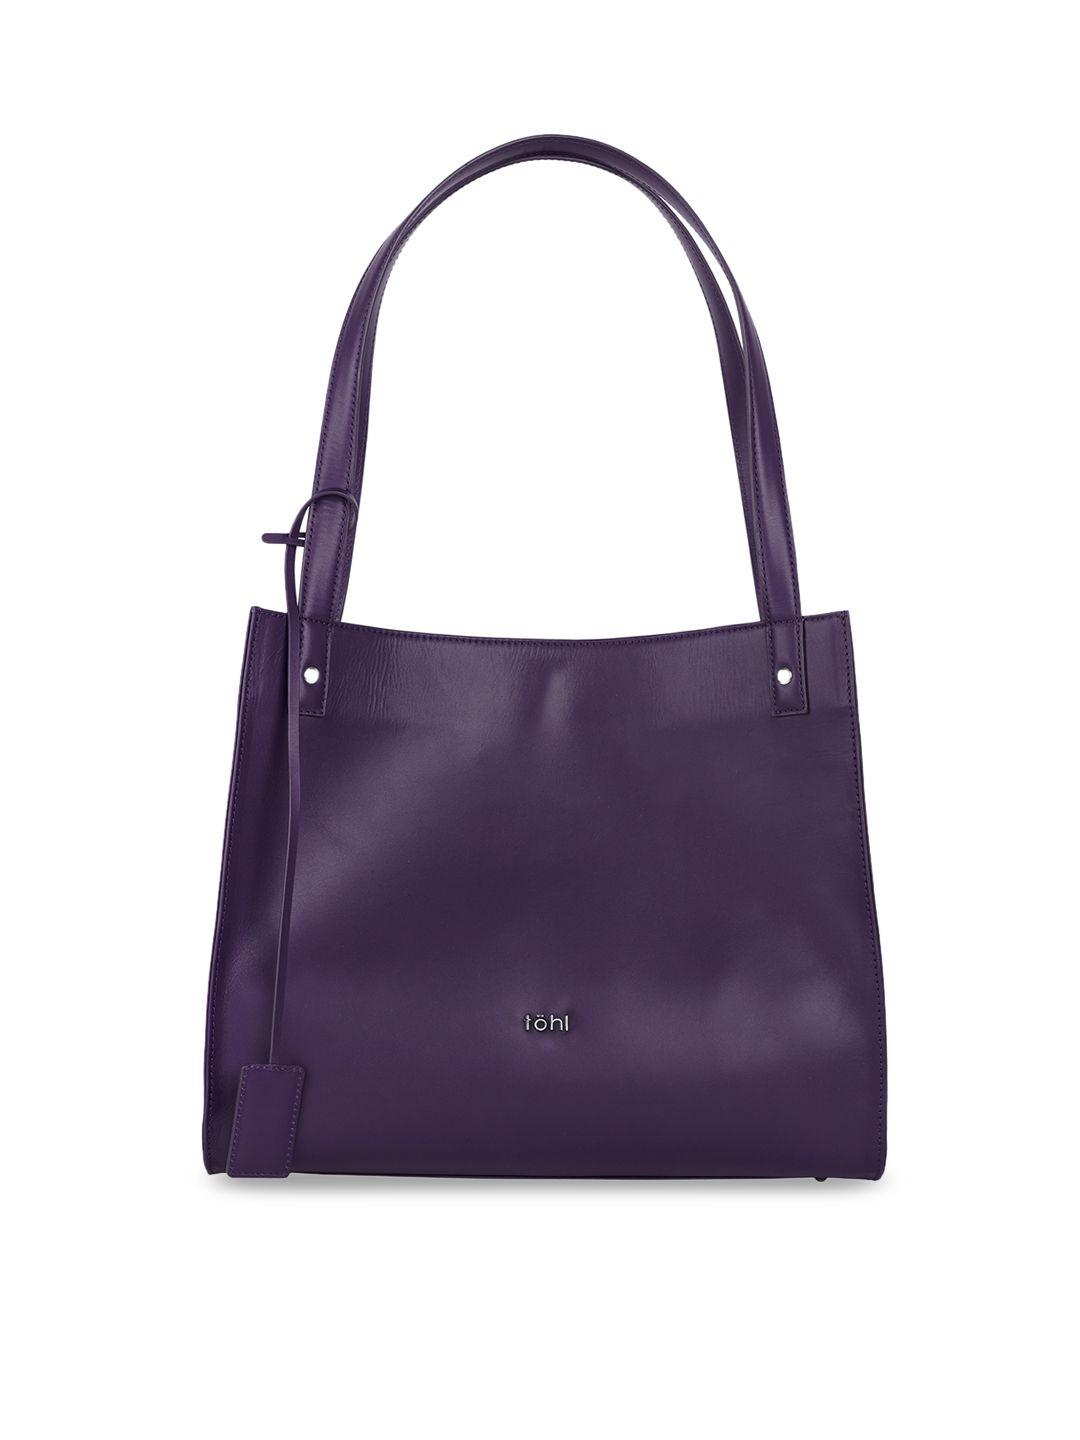 tohl purple solid tote bag